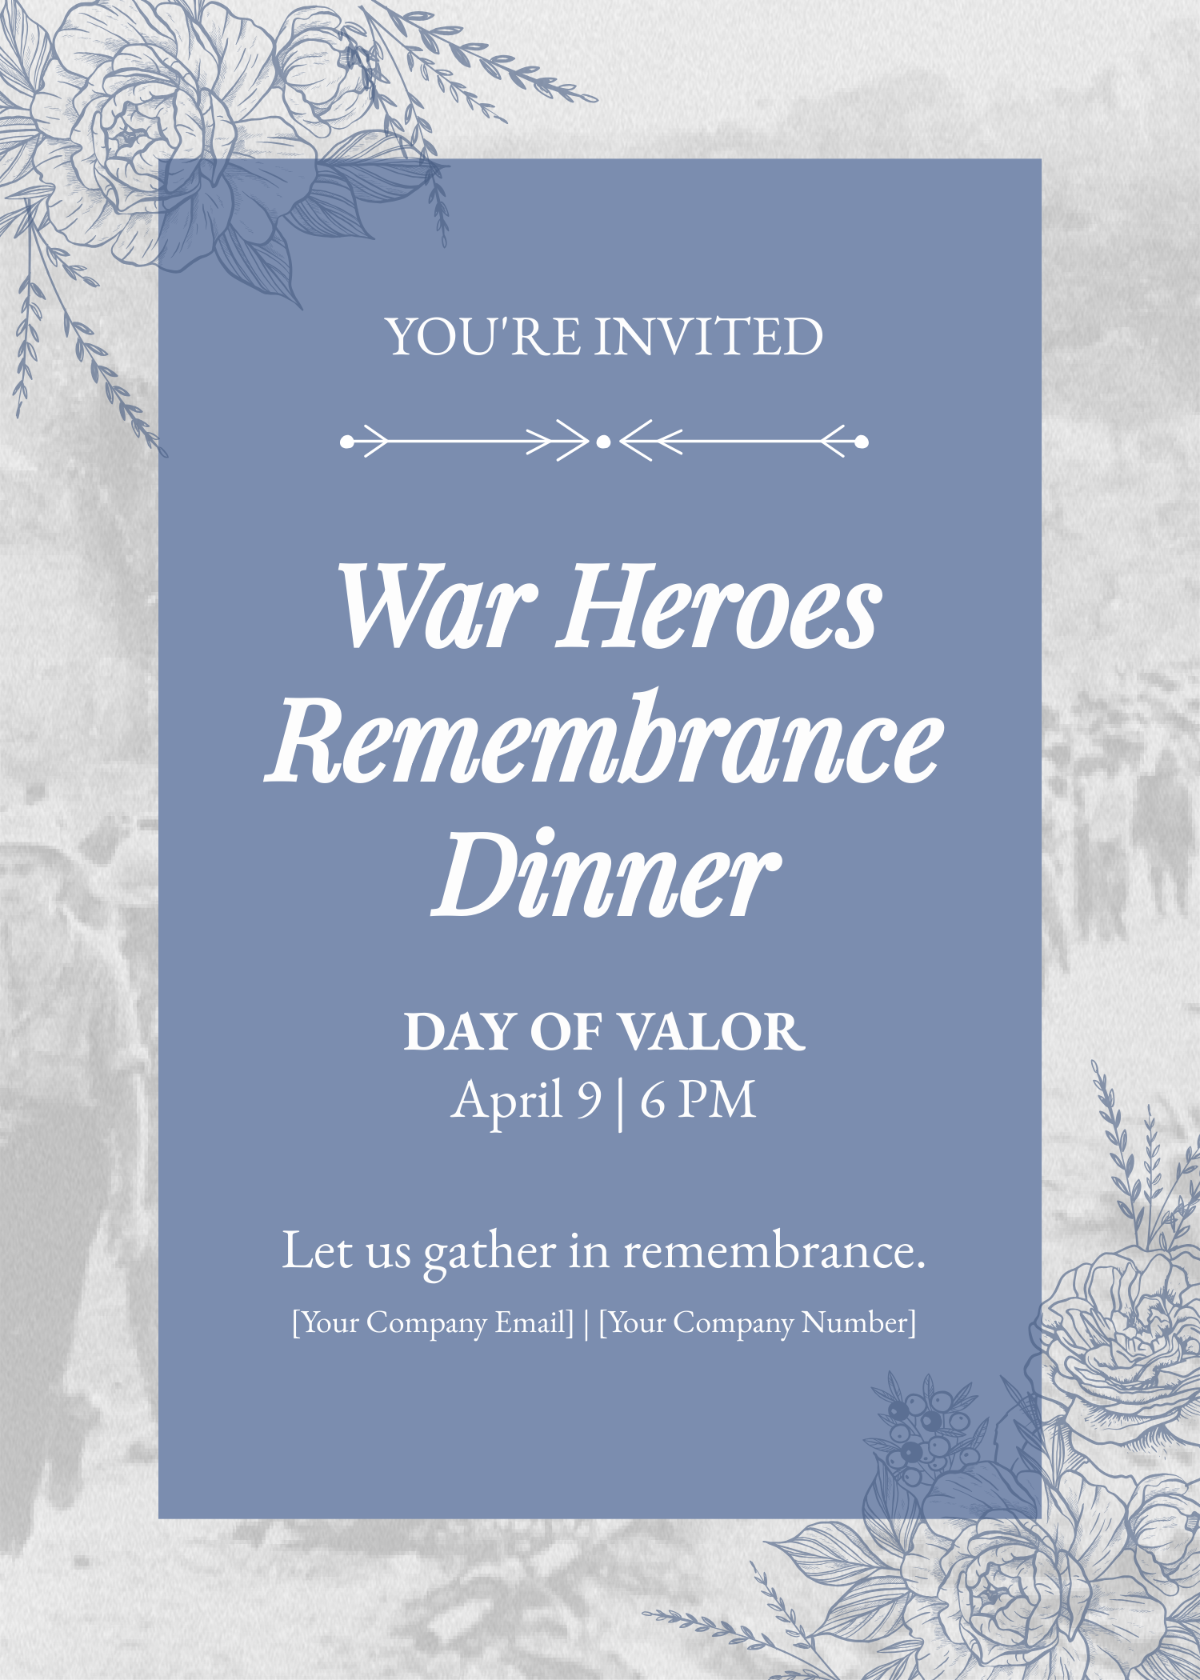 Free Day of Valor Invitation Card Template